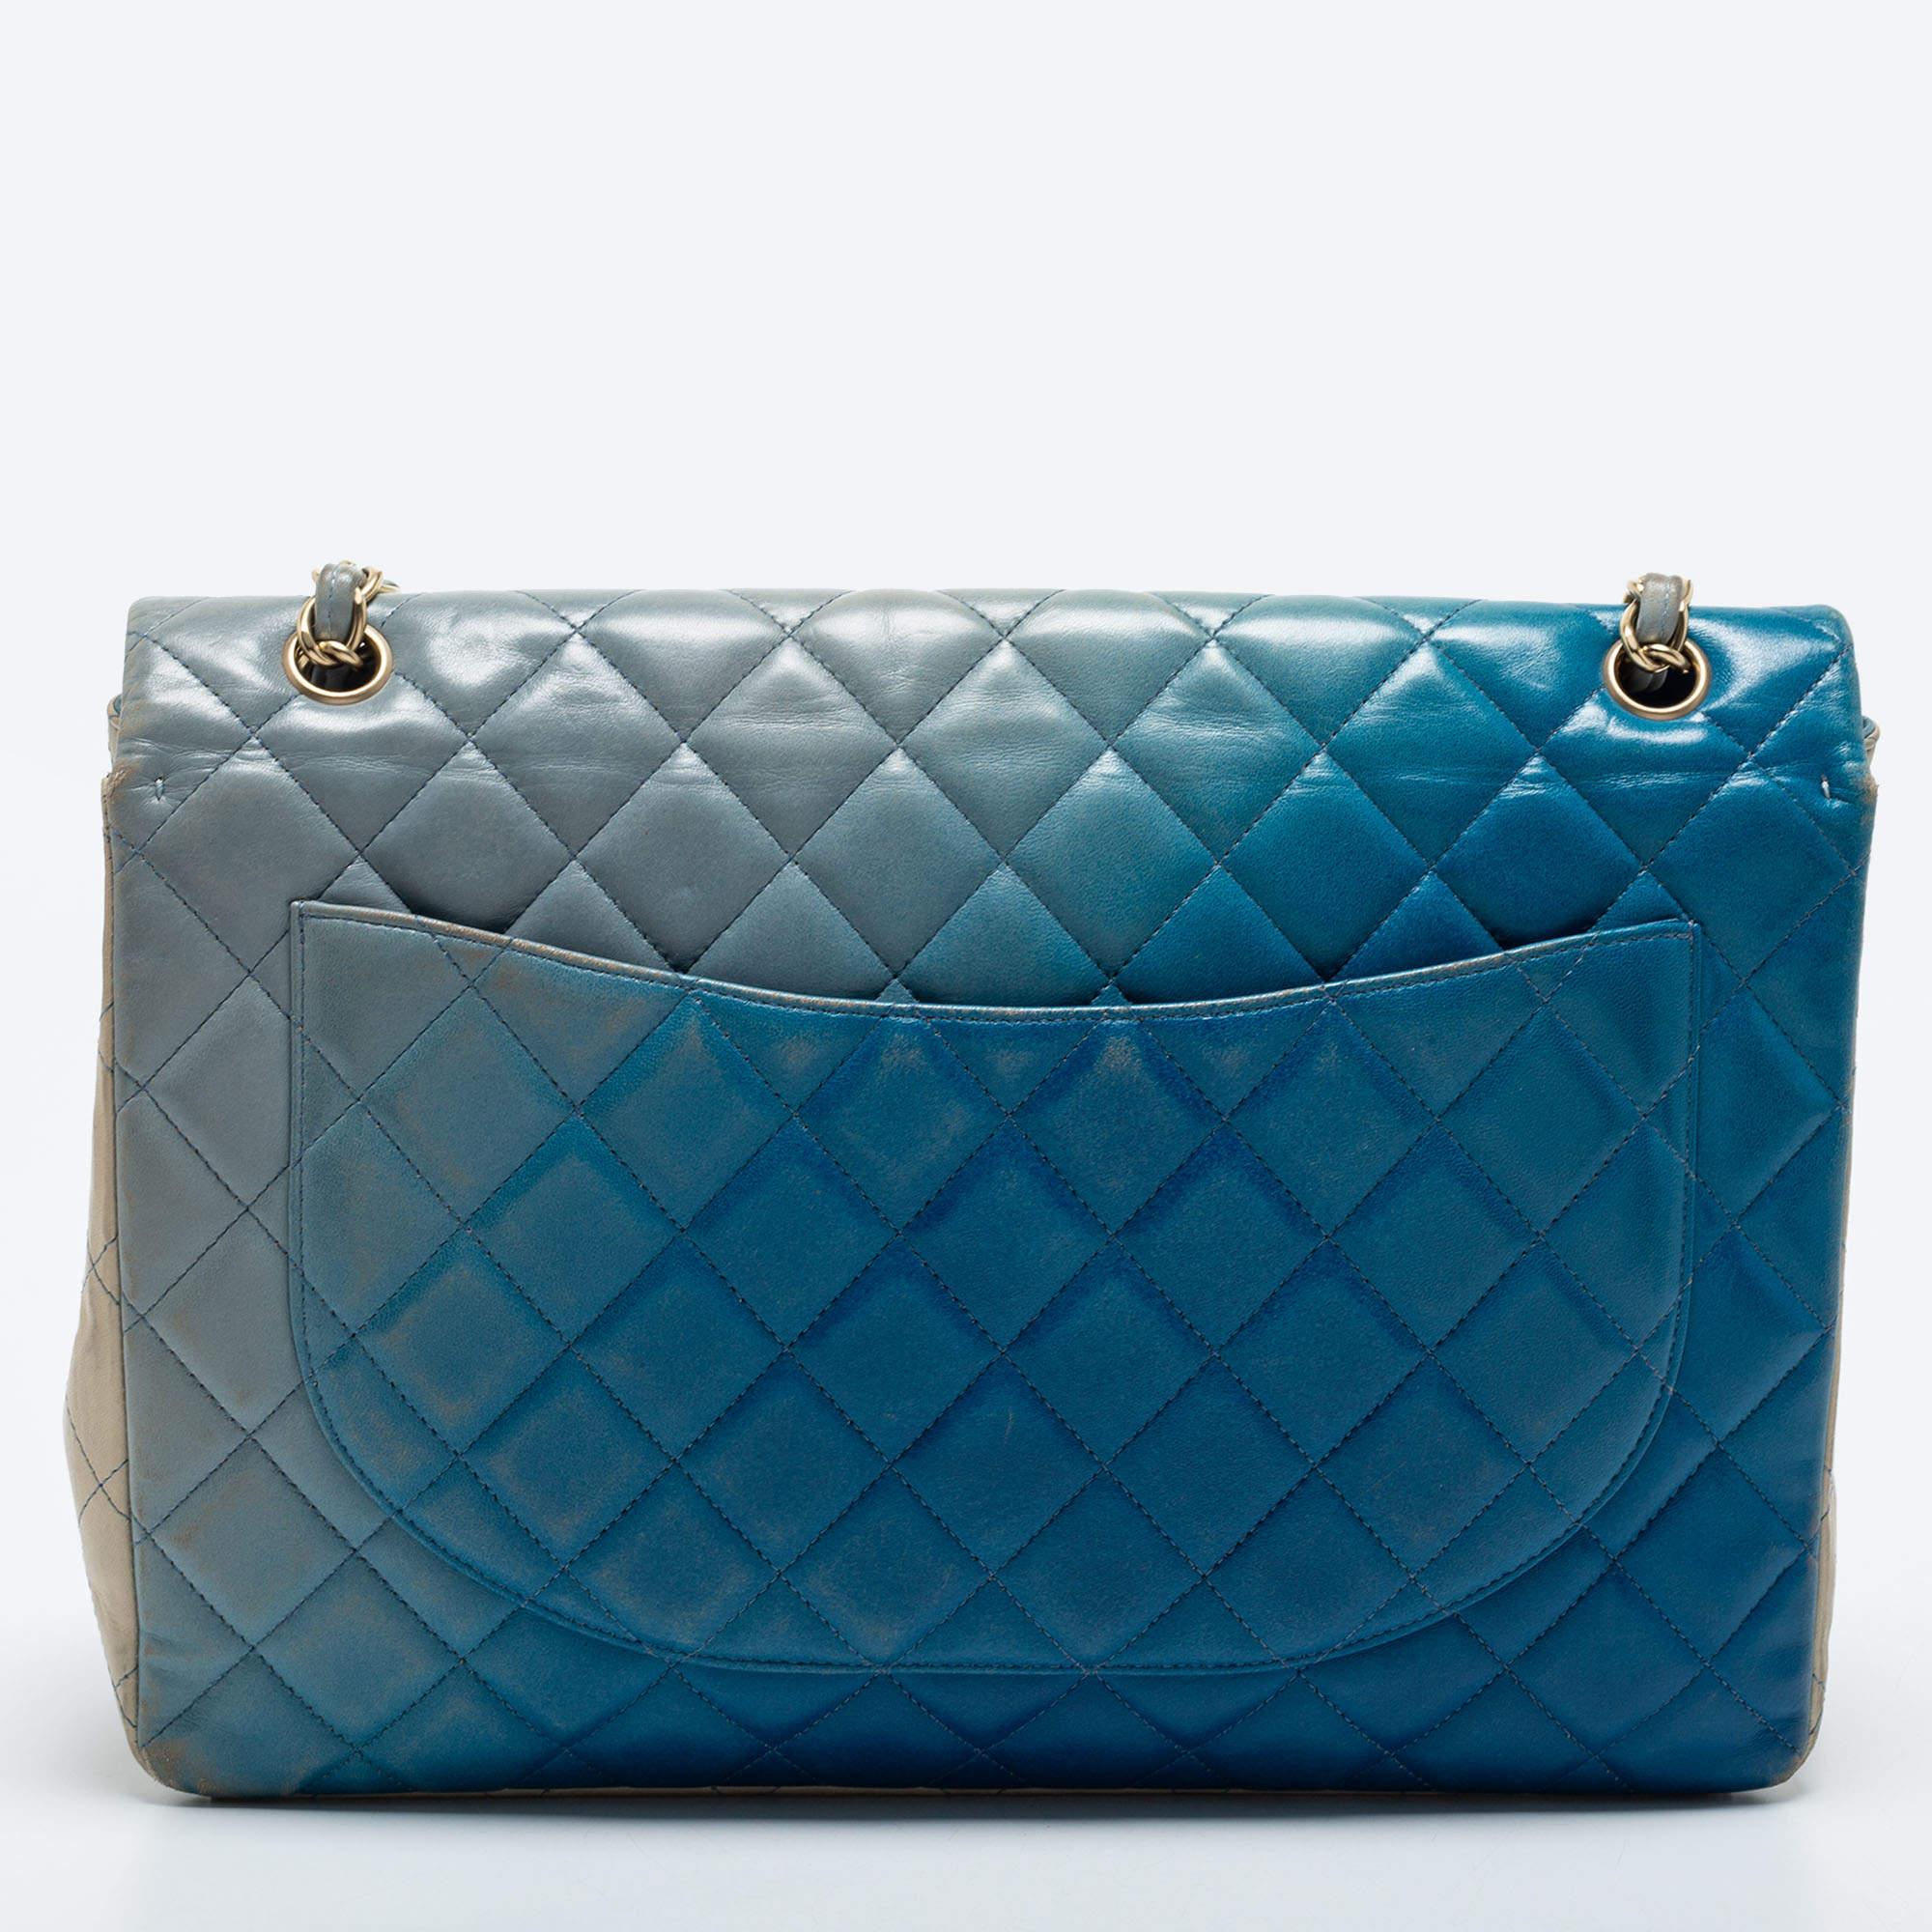 Chanel Ombre Blue Quilted Leather Maxi Classic Single Flap Shoulder Bag 5